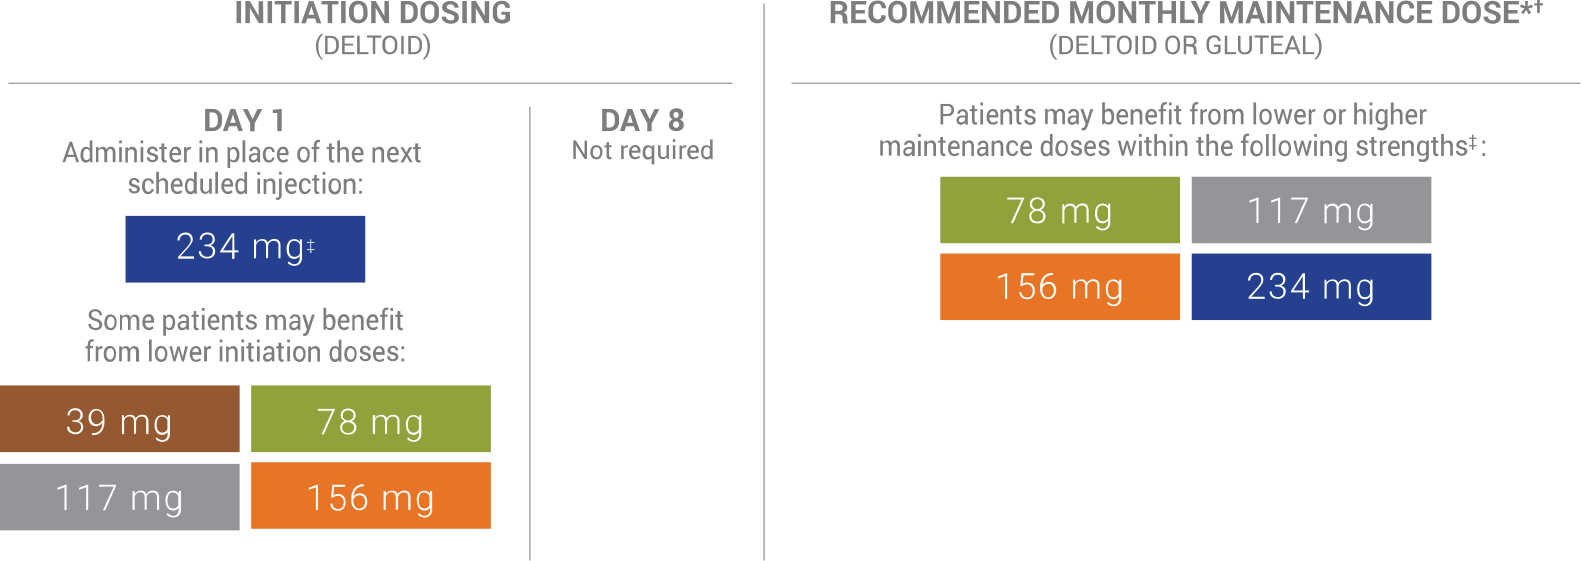 A chart showing the recommended dosage when transitioning from long-acting injectables 